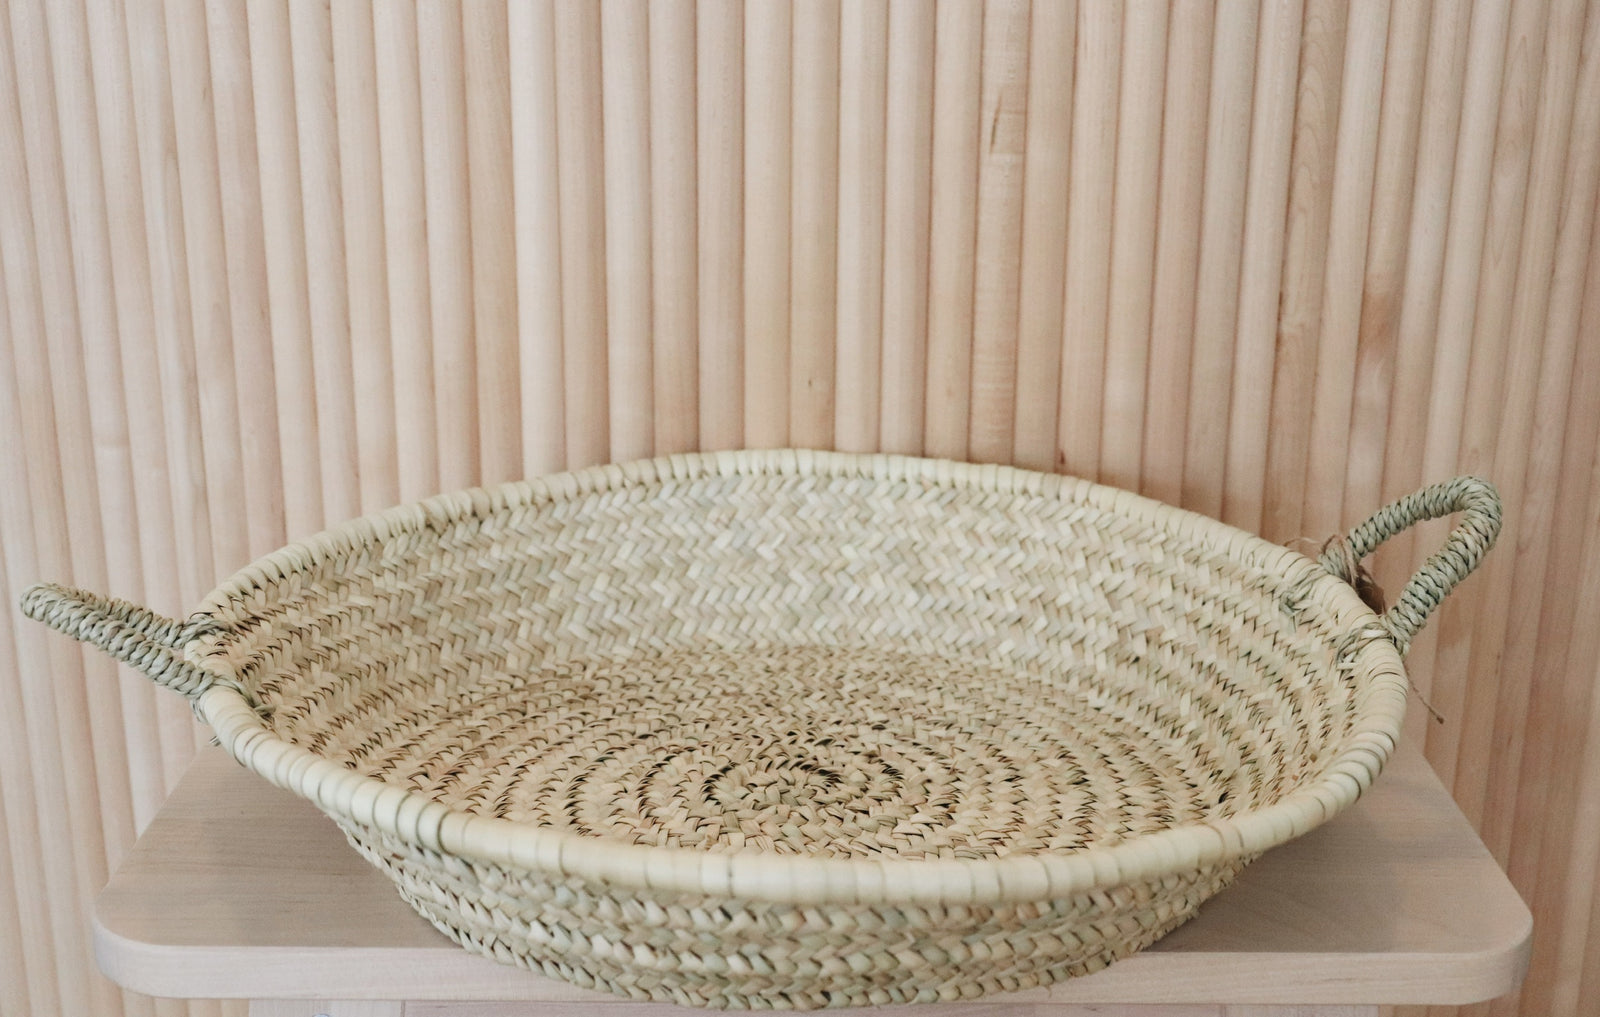 Woven Plate With Handles